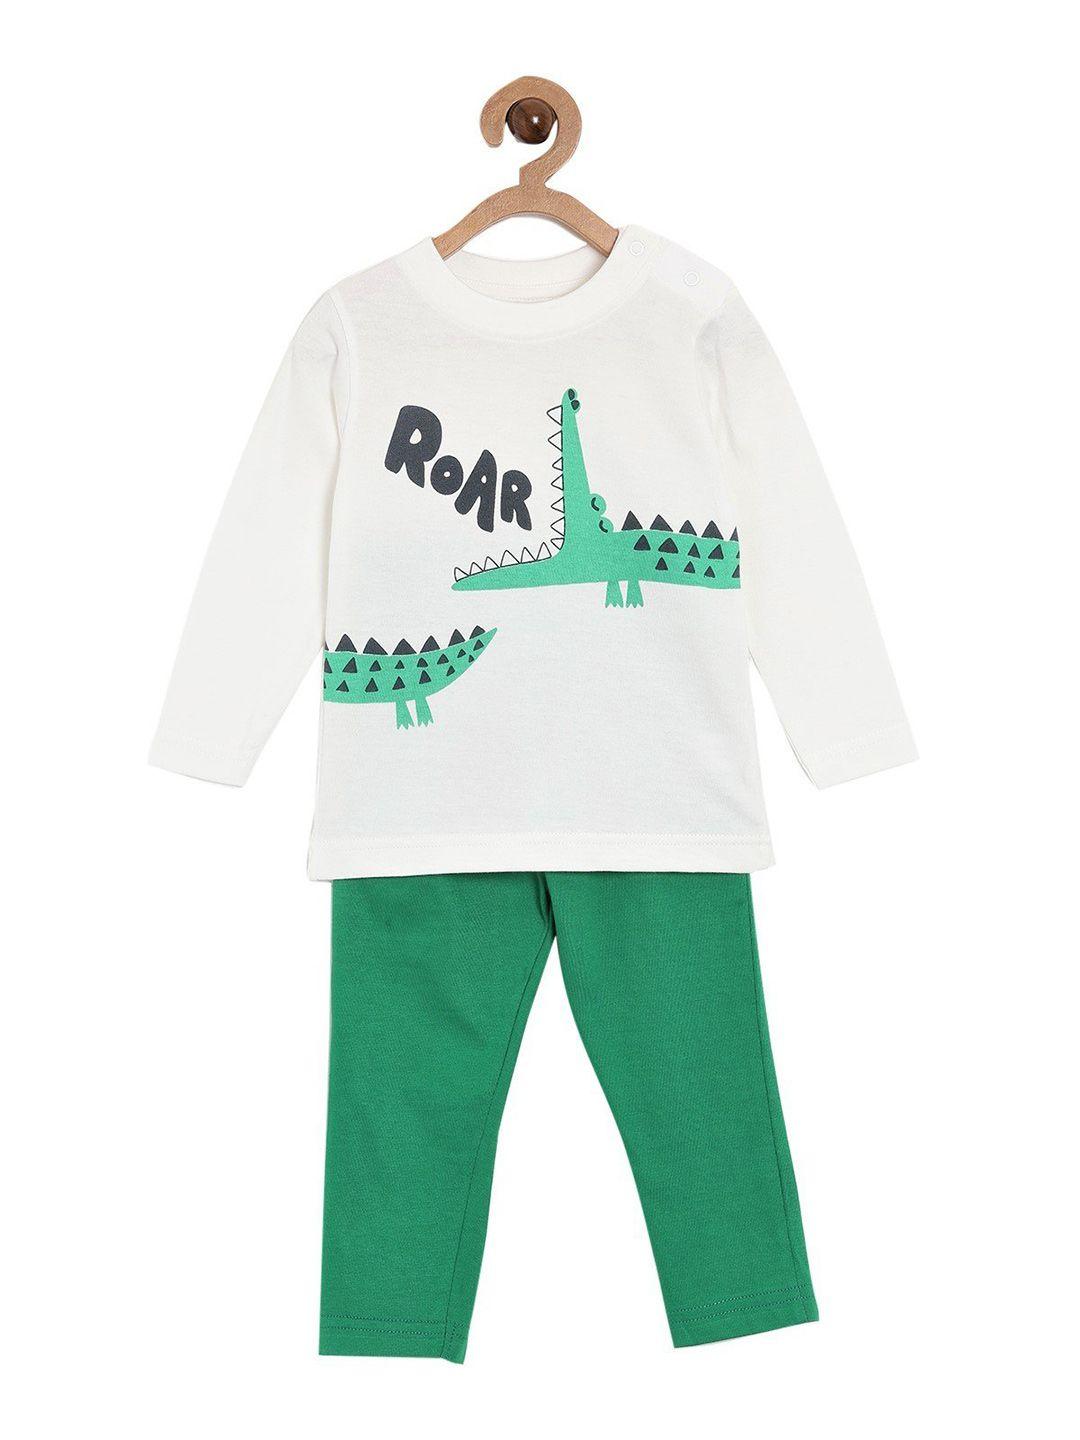 the mom store kids white & green printed top with pyjamas